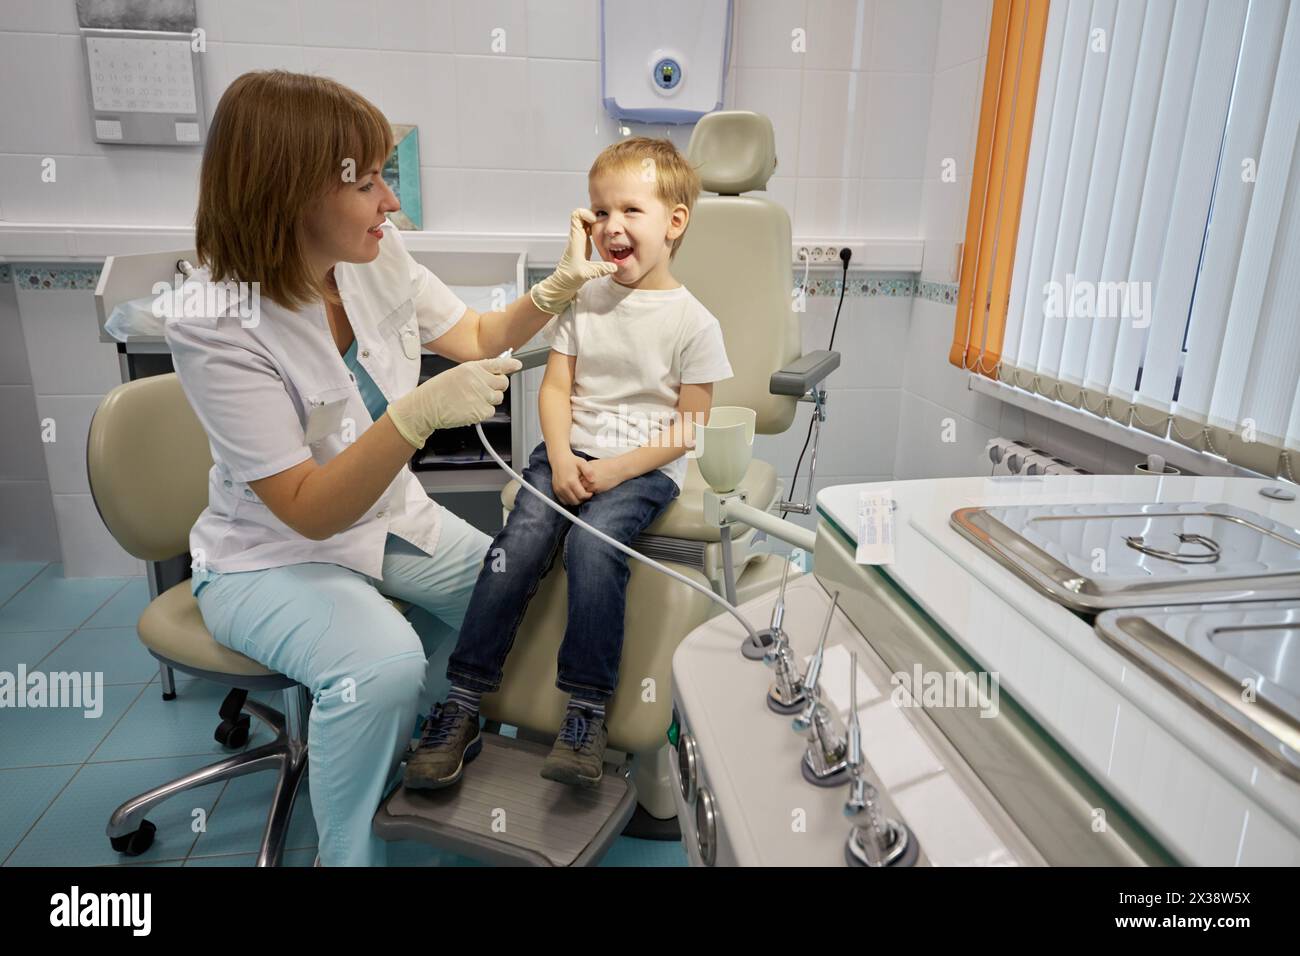 Female doctor examines mouth of boy sitting in medical armchair. Stock Photo